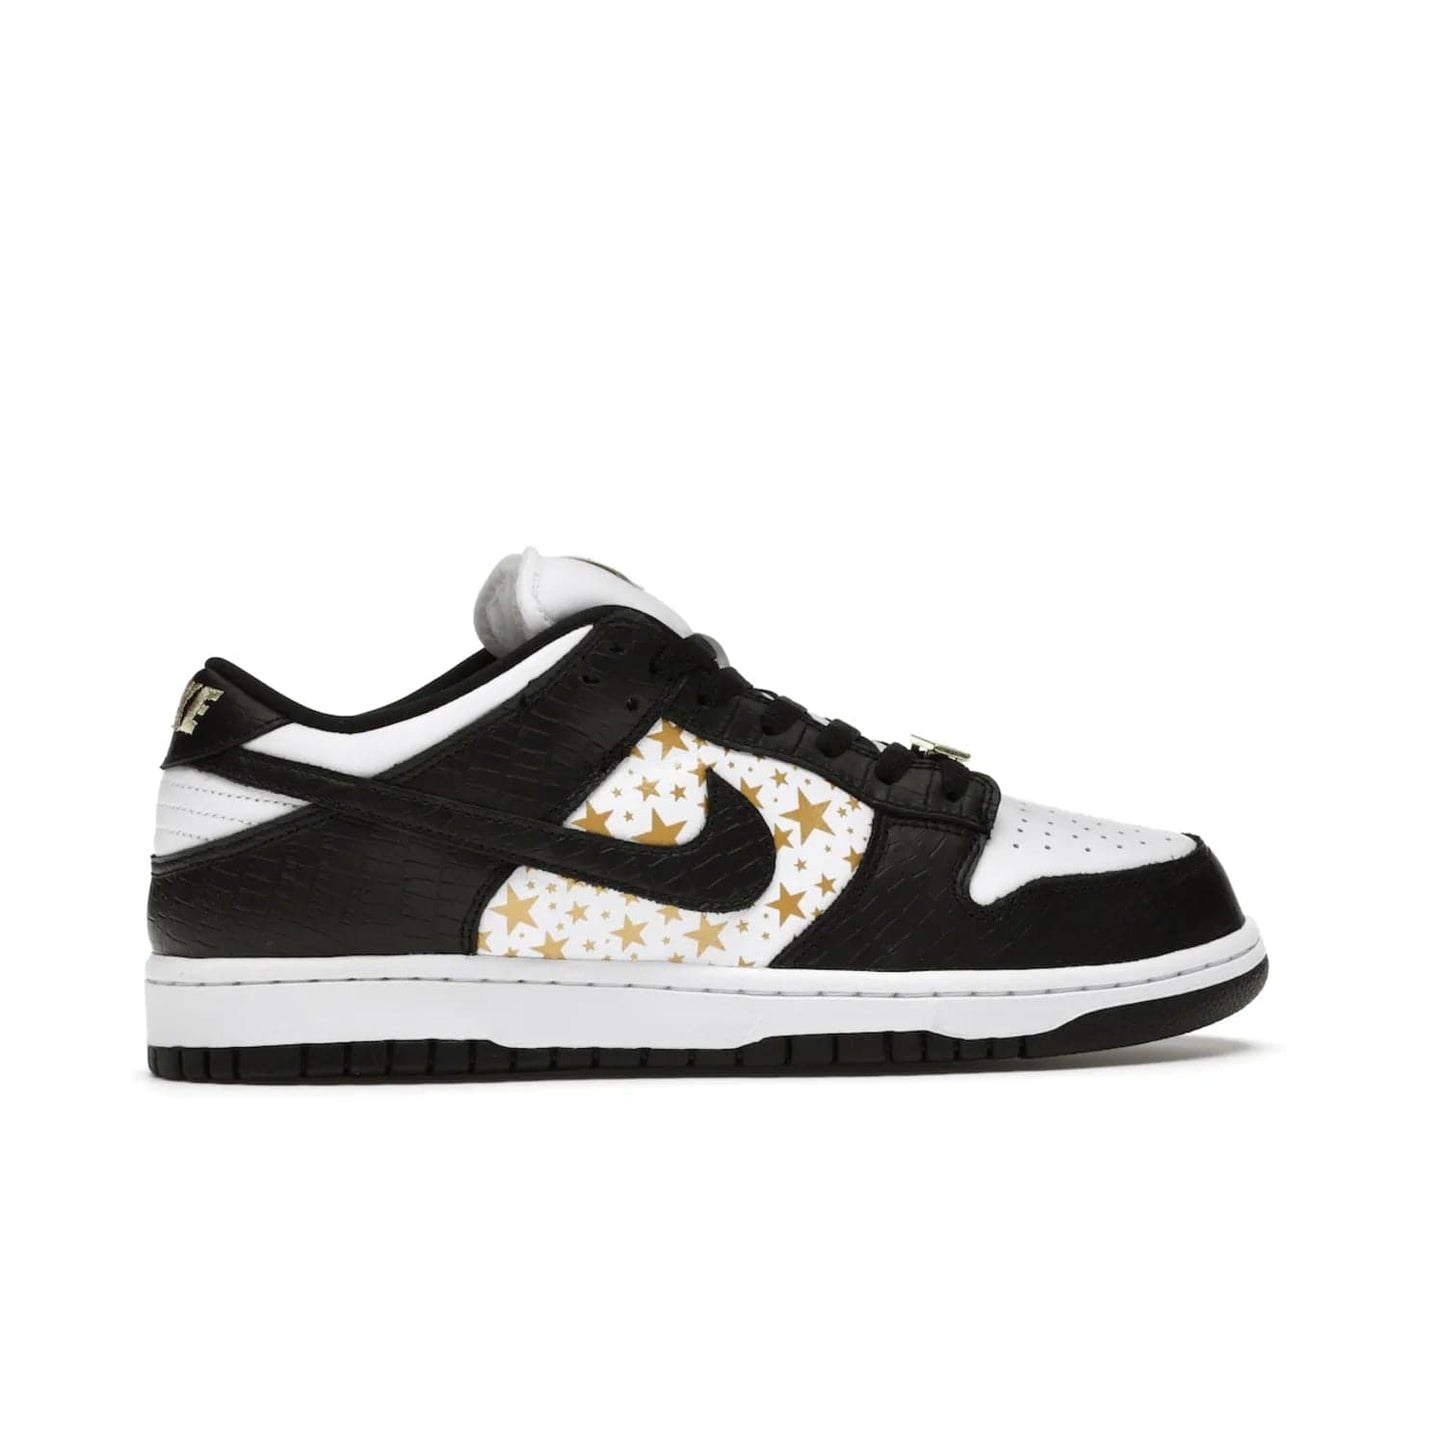 Nike SB Dunk Low Supreme Stars Black (2021) - Image 36 - Only at www.BallersClubKickz.com - Retro style and signature details make the Nike SB Dunk Low Supreme Black a must-have. This special edition shoe features a white leather upper and black croc skin overlays complemented by gold stars and deubré. Enjoy a piece of SB history and grab yours today.